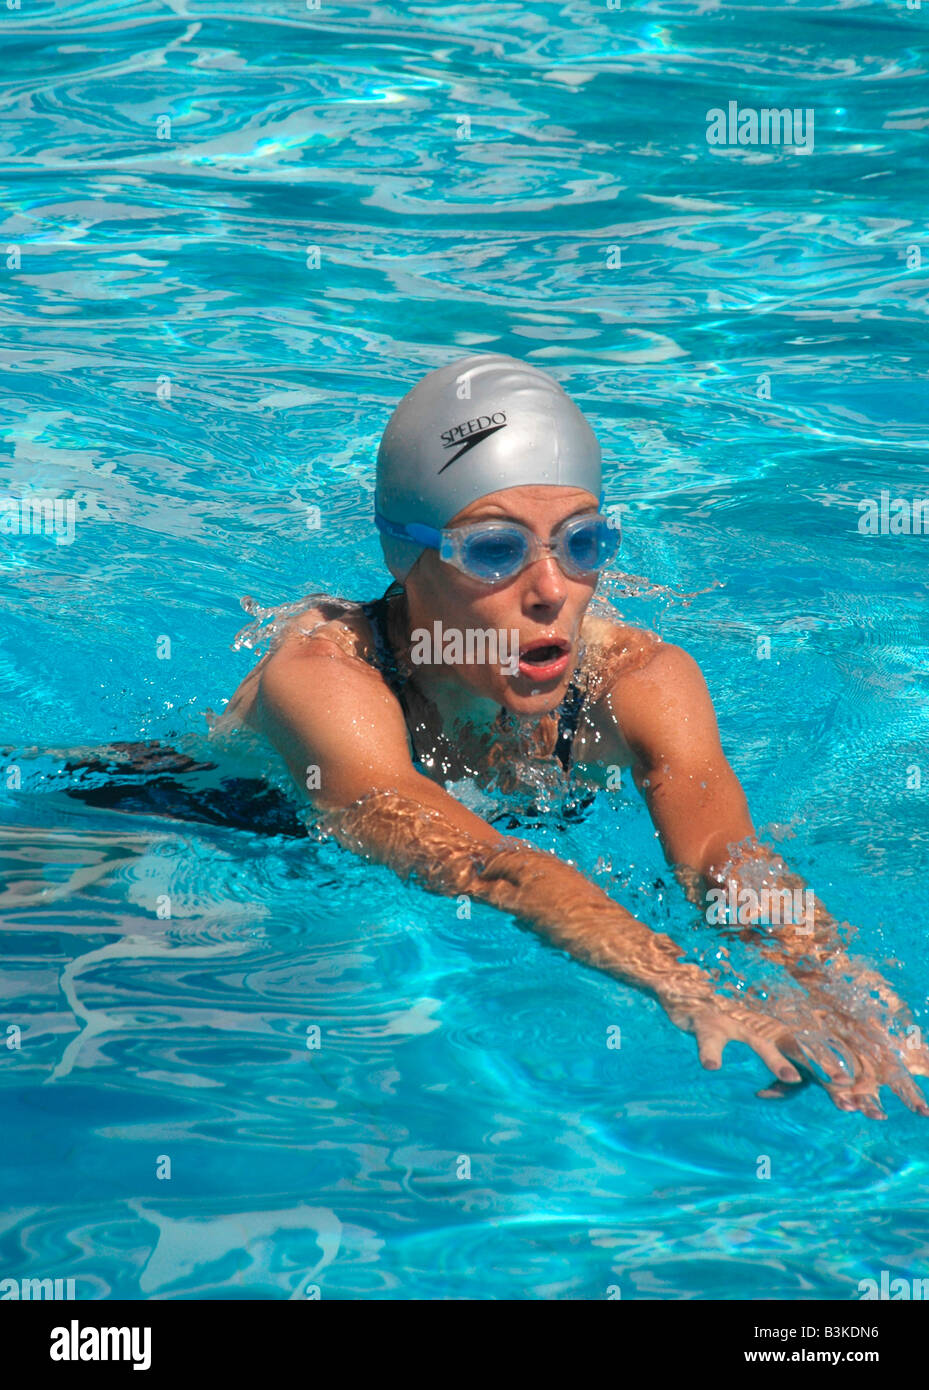 A woman swims in an  outdoor hotel swimming pool Stock Photo